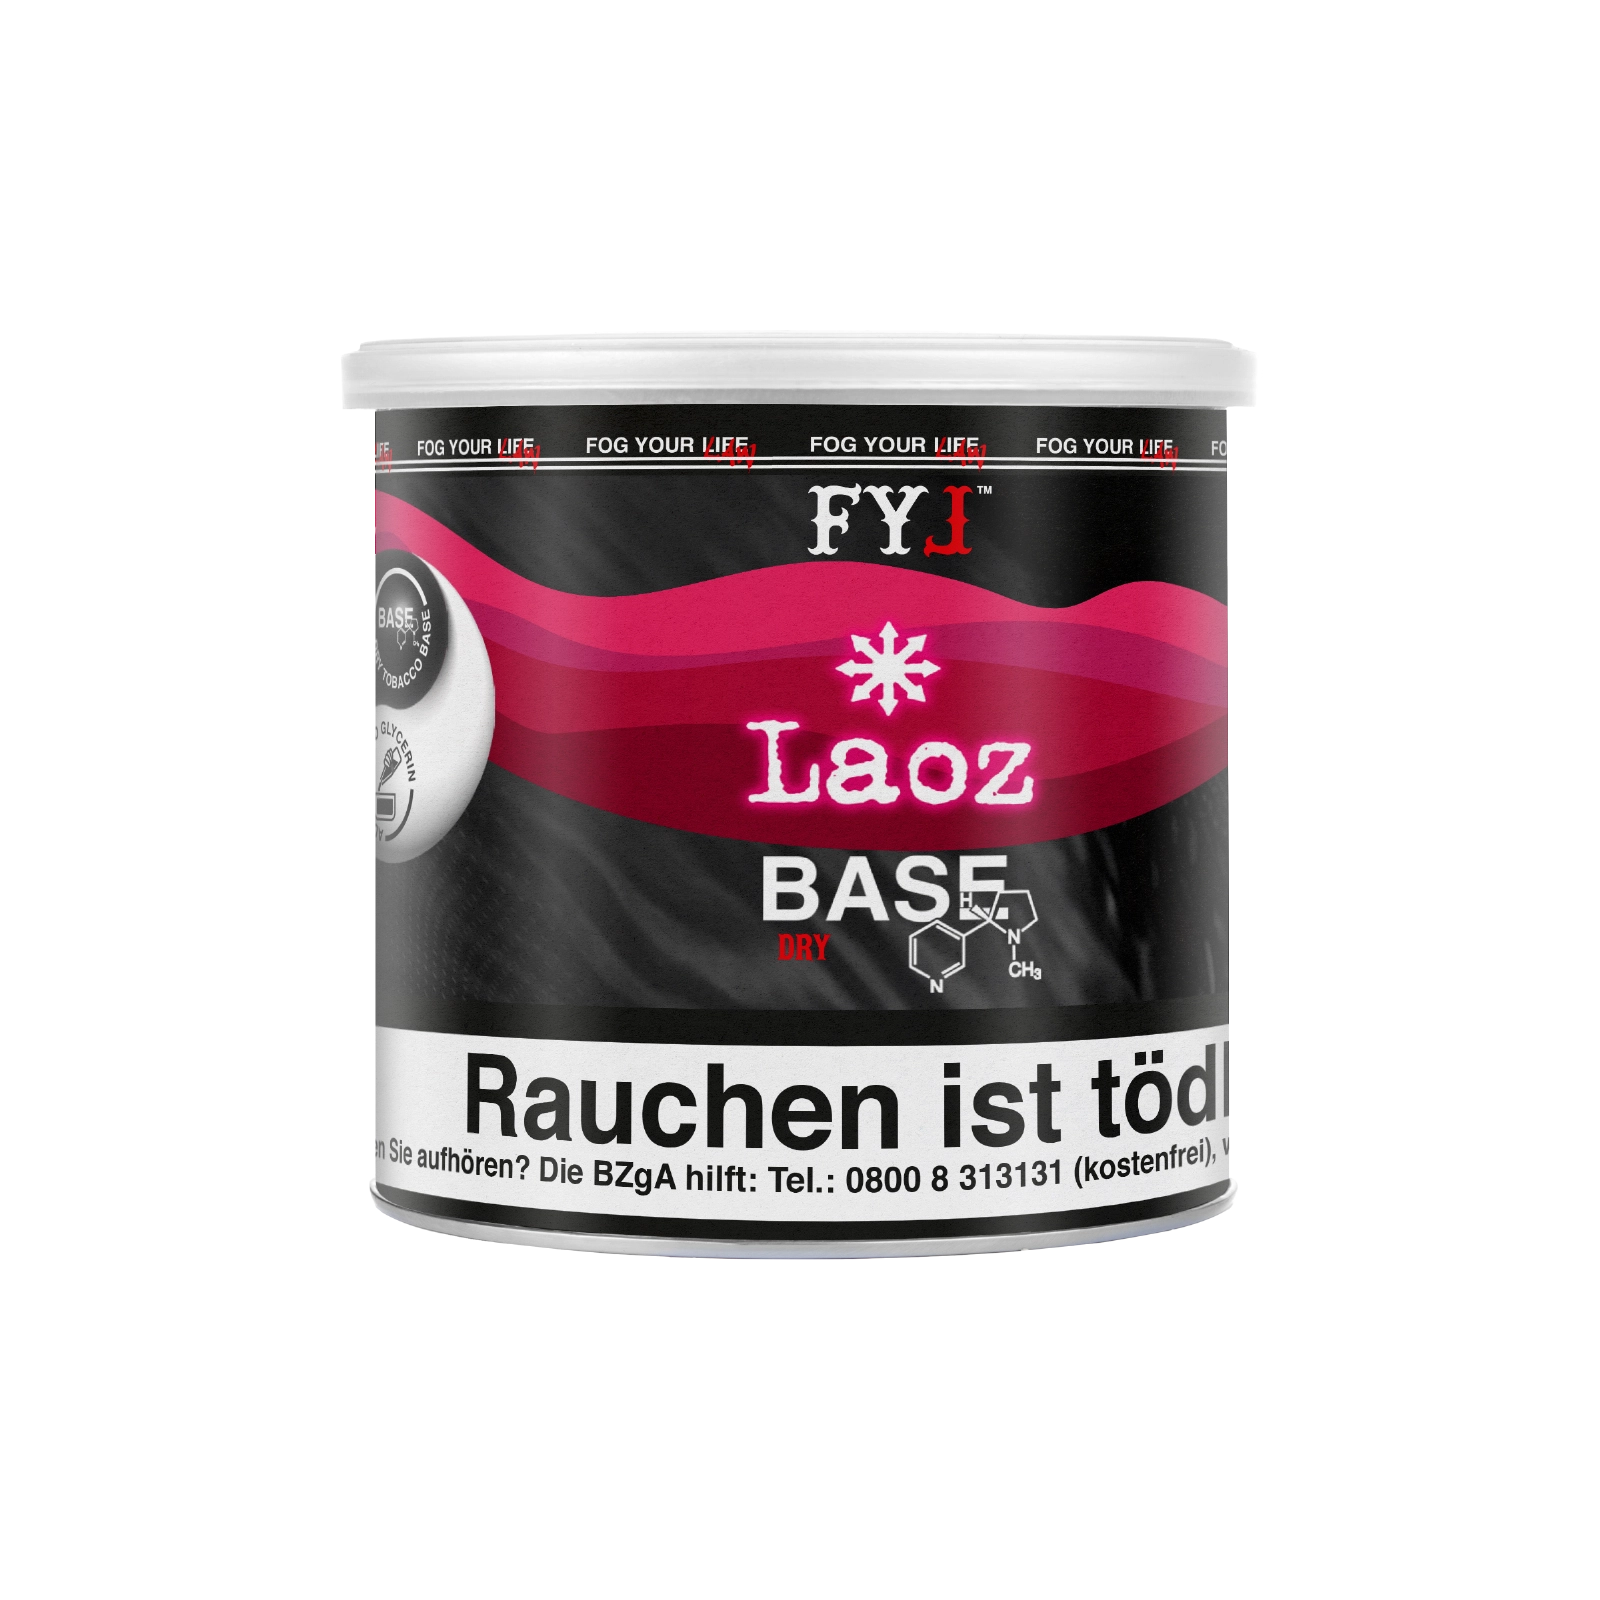 fog-your-law-dry-base-mit-aroma-laoz-65-g2